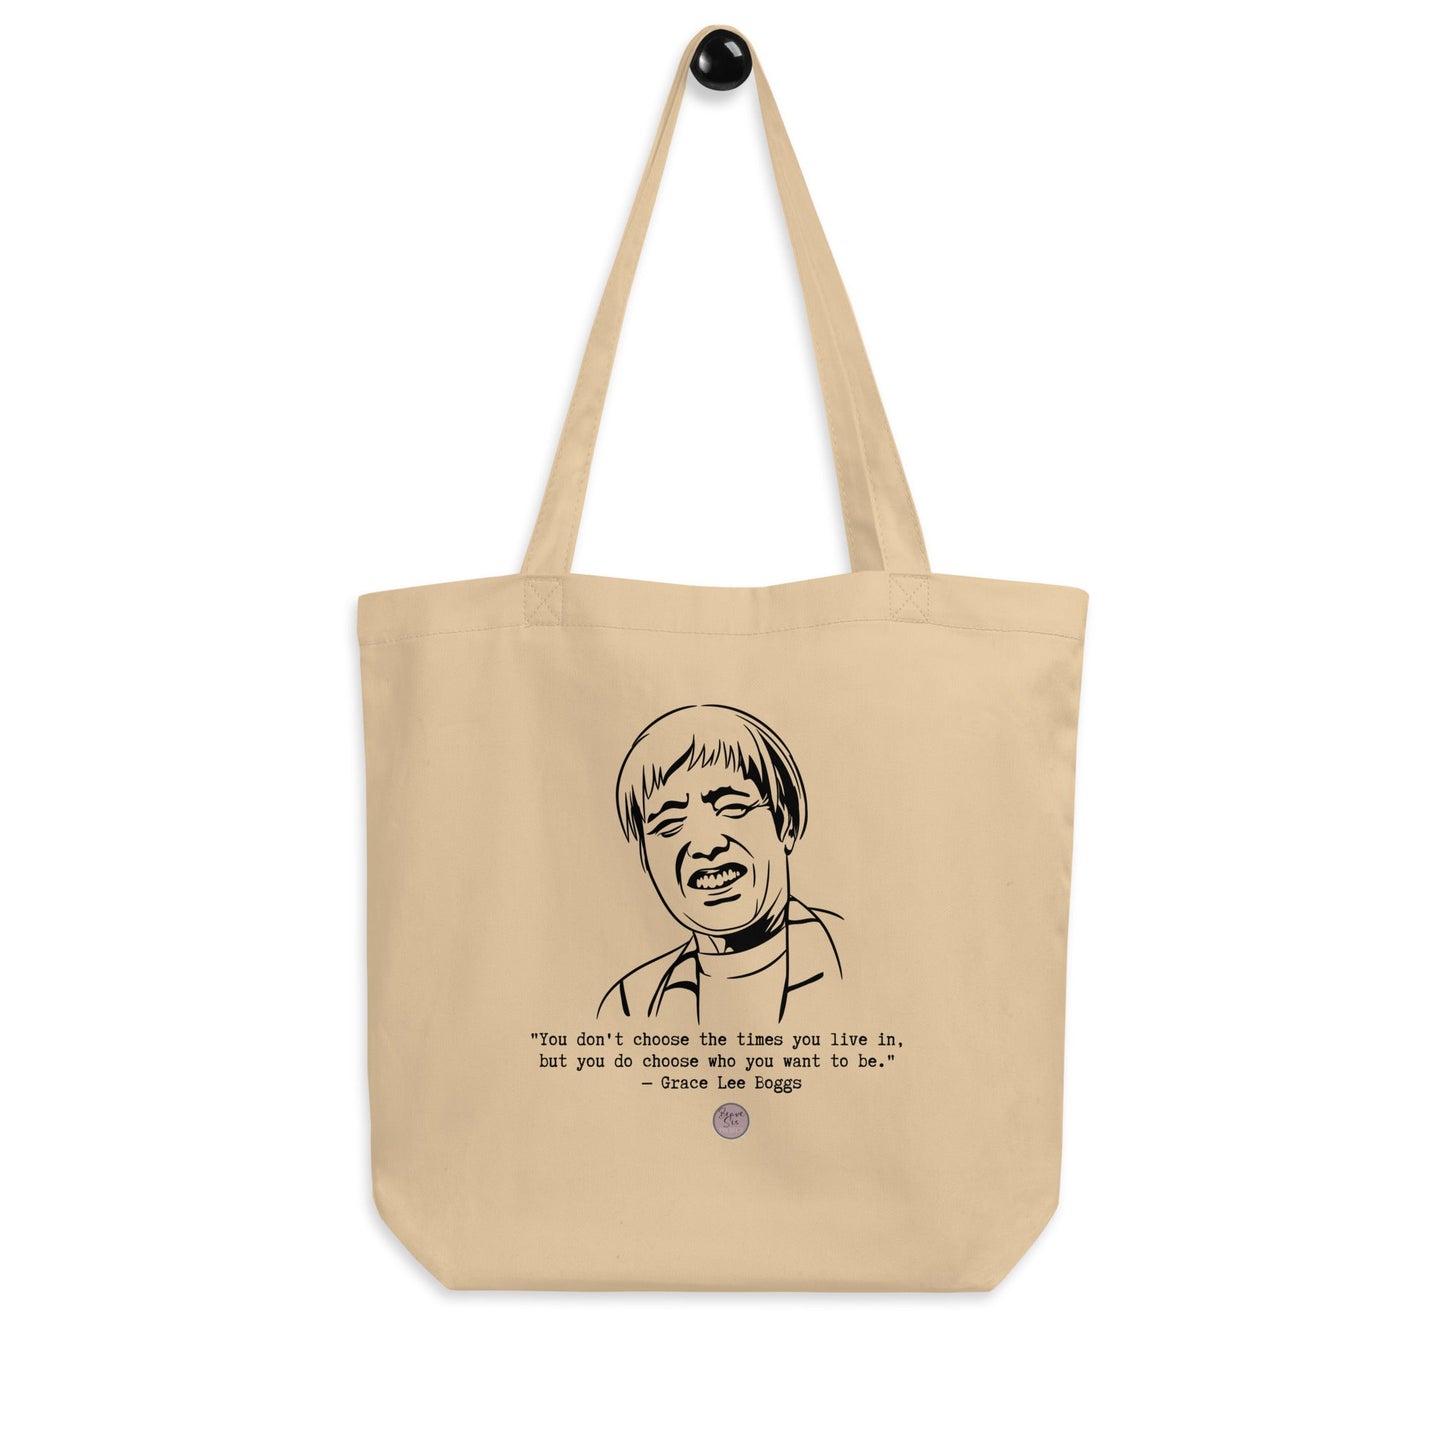 Grace Lee Boggs "You Don't Choose the Time" Eco Tote Bag